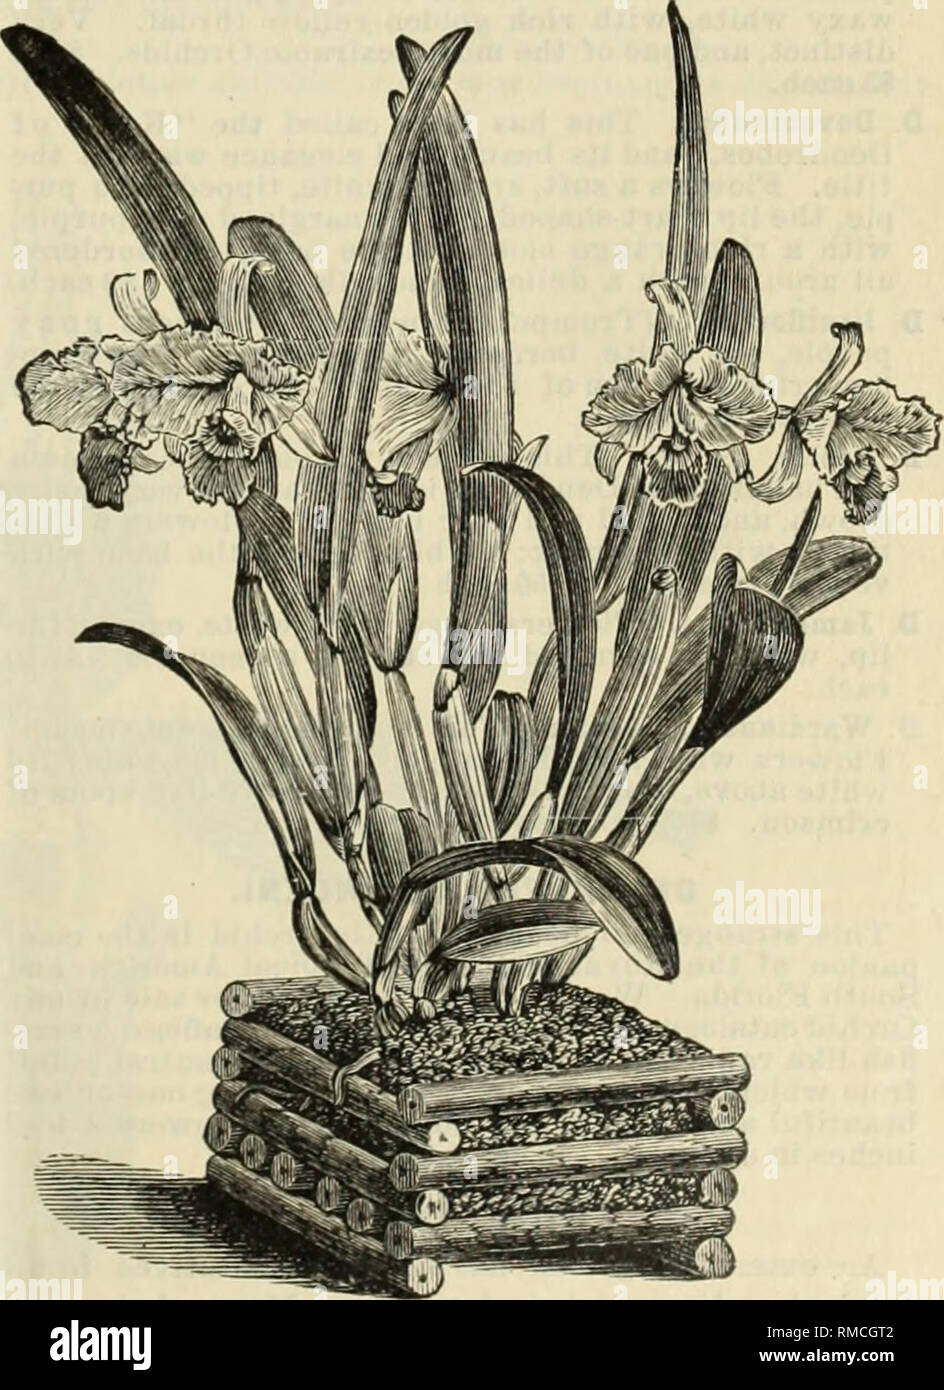 . Annual illustrated and descriptive catalogue of new, rare and beautiful plants and seeds. Nurseries (Horticulture), Florida, Catalogs; Plants, Ornamental, Catalogs; Flowers, Catalogs; Tropical plants, Catalogs; Fruit trees, Seedlings, Catalogs. Orchids. 23 ONCIDIUM. 0. papilio. (The Butterfly Orchid.) Trinidaci. Flowers large, bright yellow, barred with brown. The resem- blaucetoalarge butterfly is striking. $1.50 to$2.50 each. 0. papilio Krameriannm. A distinct and beautiful va- riety ; the flowers are large and darker colored, the markings very clear and distinct. Large plants, with with t Stock Photo